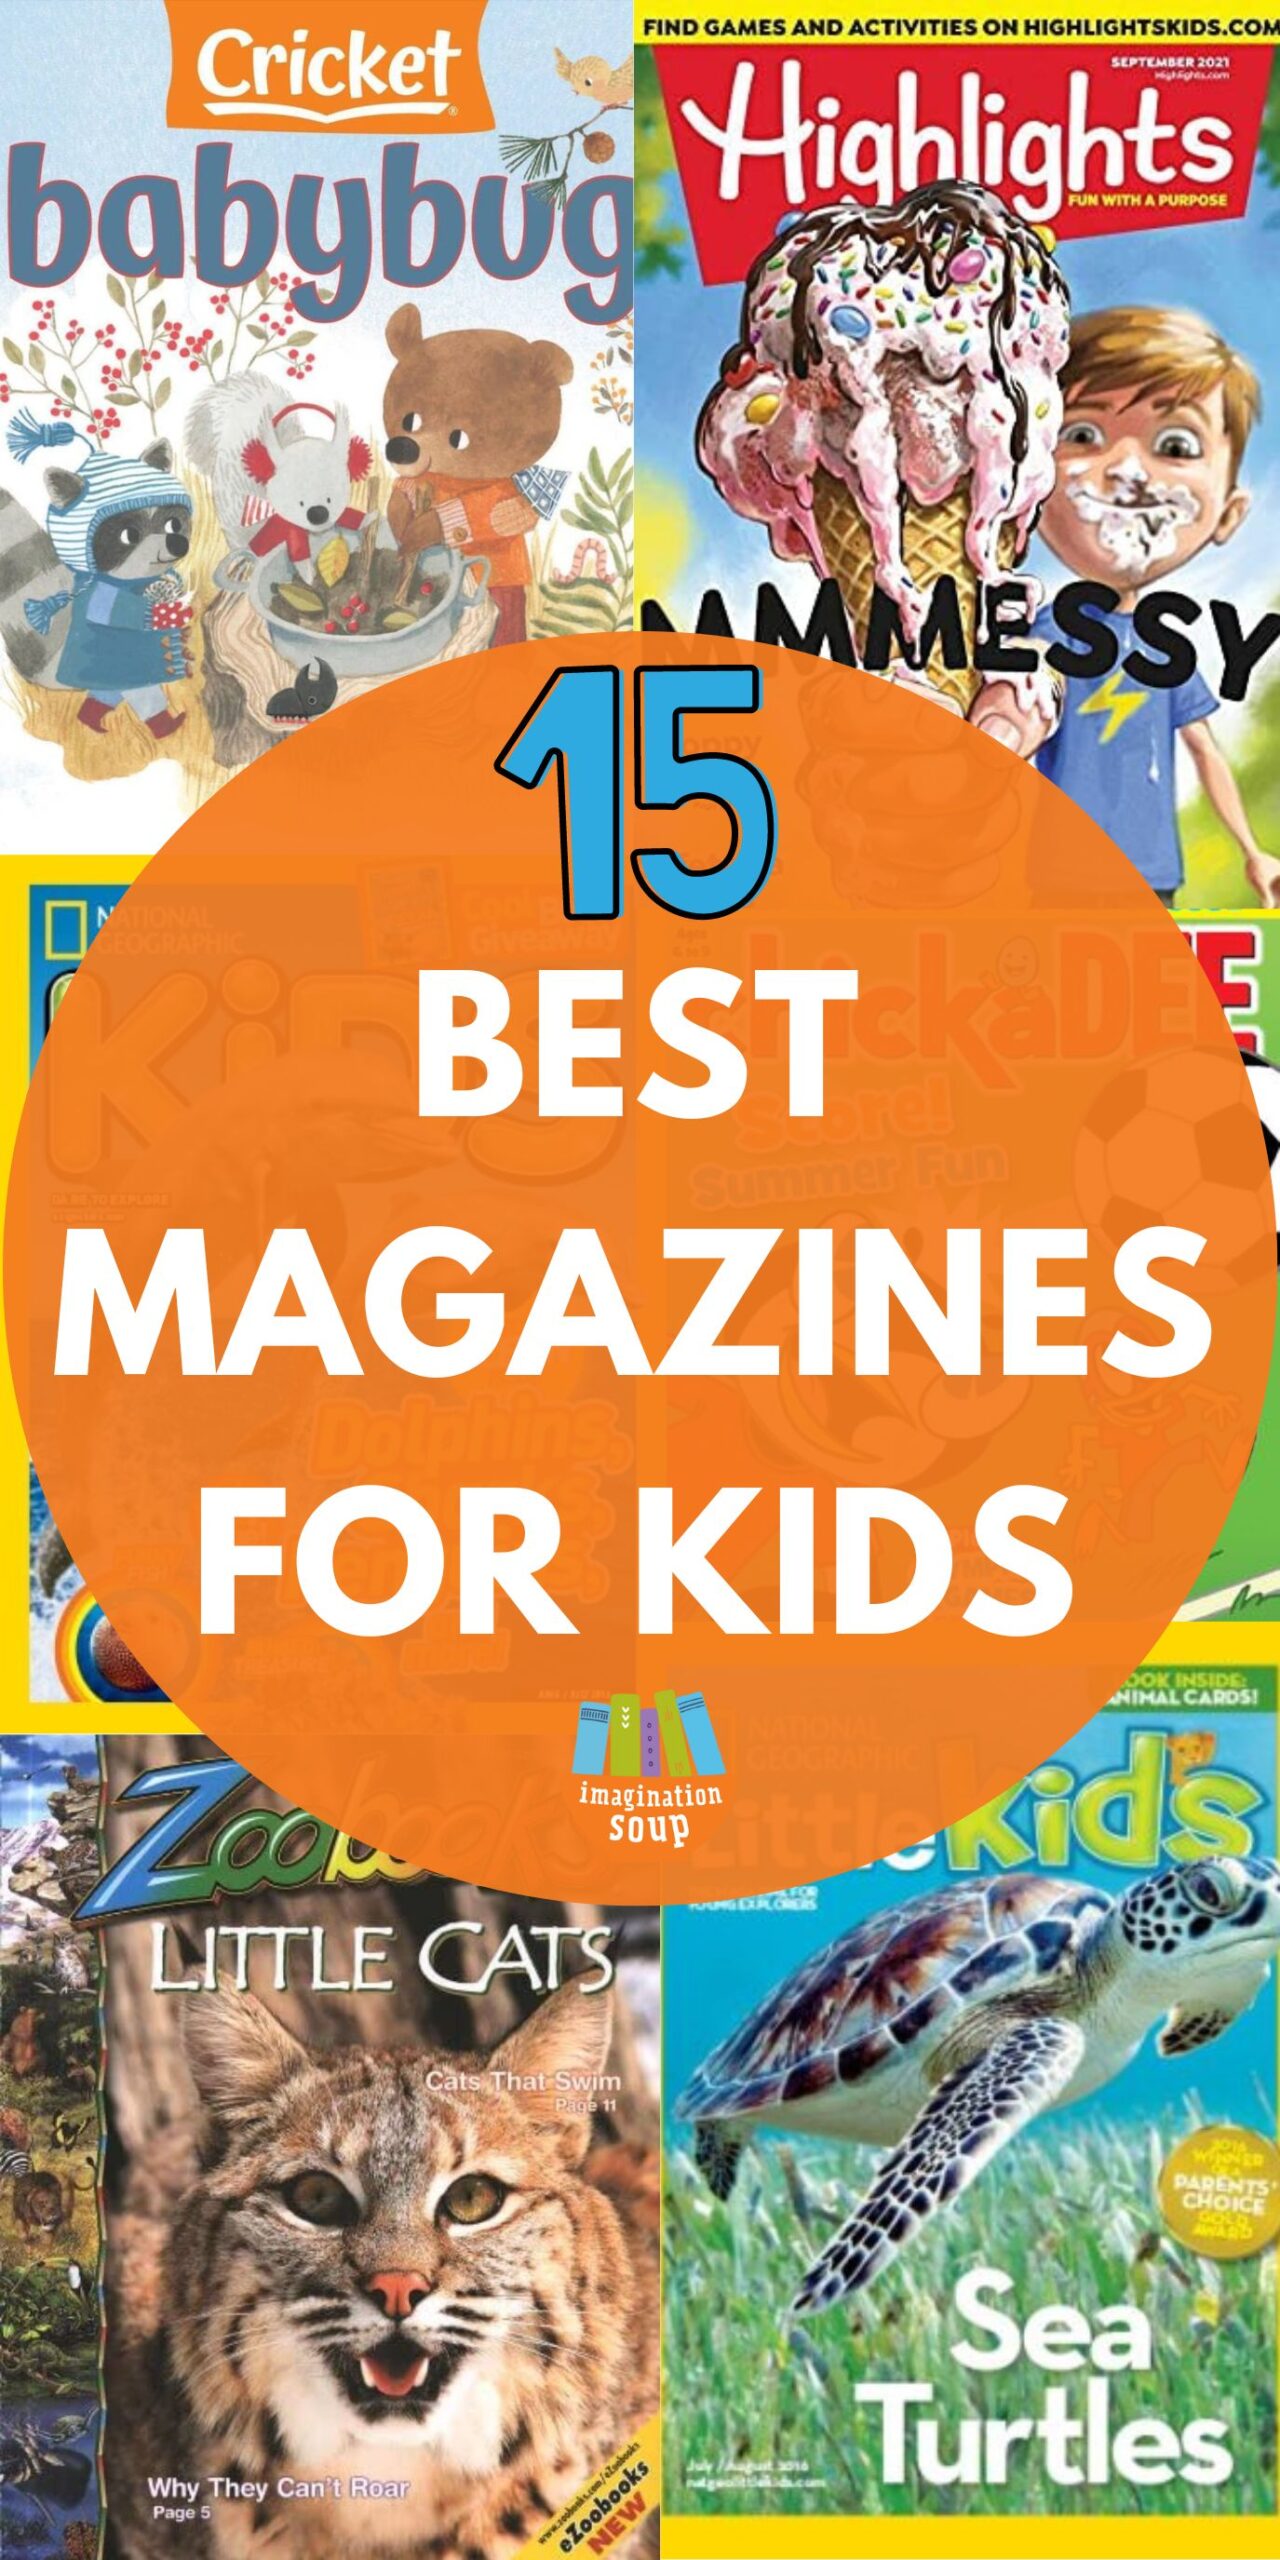 Anyone else think that magazines for kids might get your children and students to read more?

Would your kids read more if they had a magazine subscription? Probably.

Because reading magazines counts as reading. Plus, getting mail rocks! Not to mention, reading fiction and nonfiction magazine articles are both important for young readers.